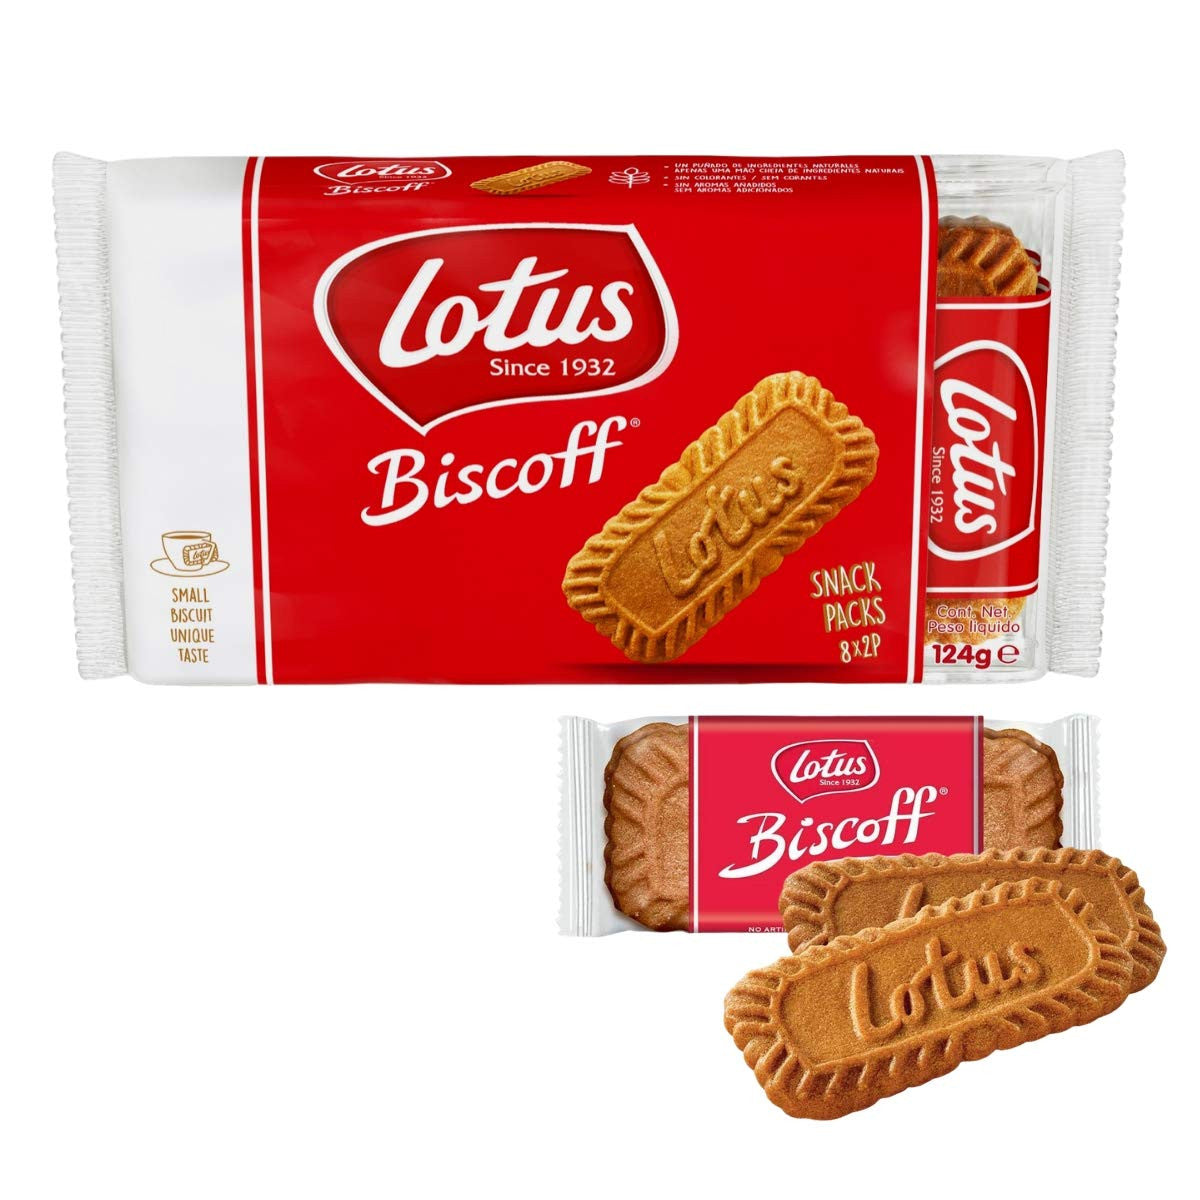 Lotus Biscoff Pocket Pack - 8 Pockets X 2 Biscuits, 124g/4.4 oz., {Imported from Canada}